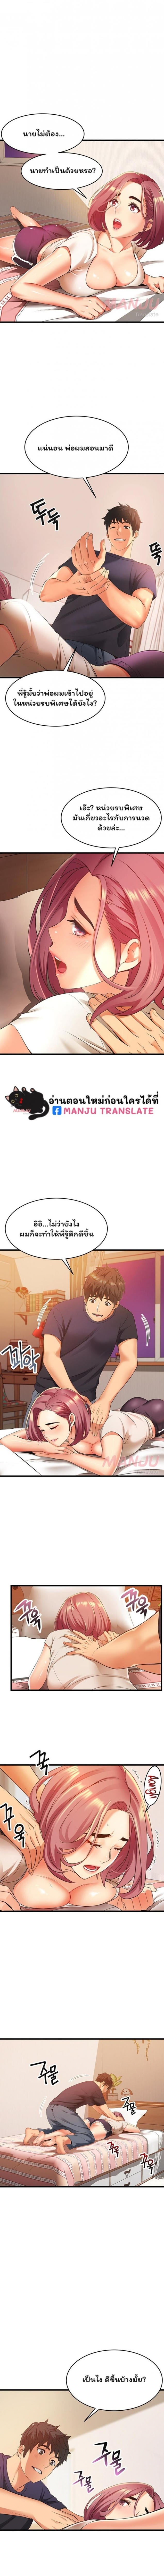 An Alley Story 3 ภาพที่ 7